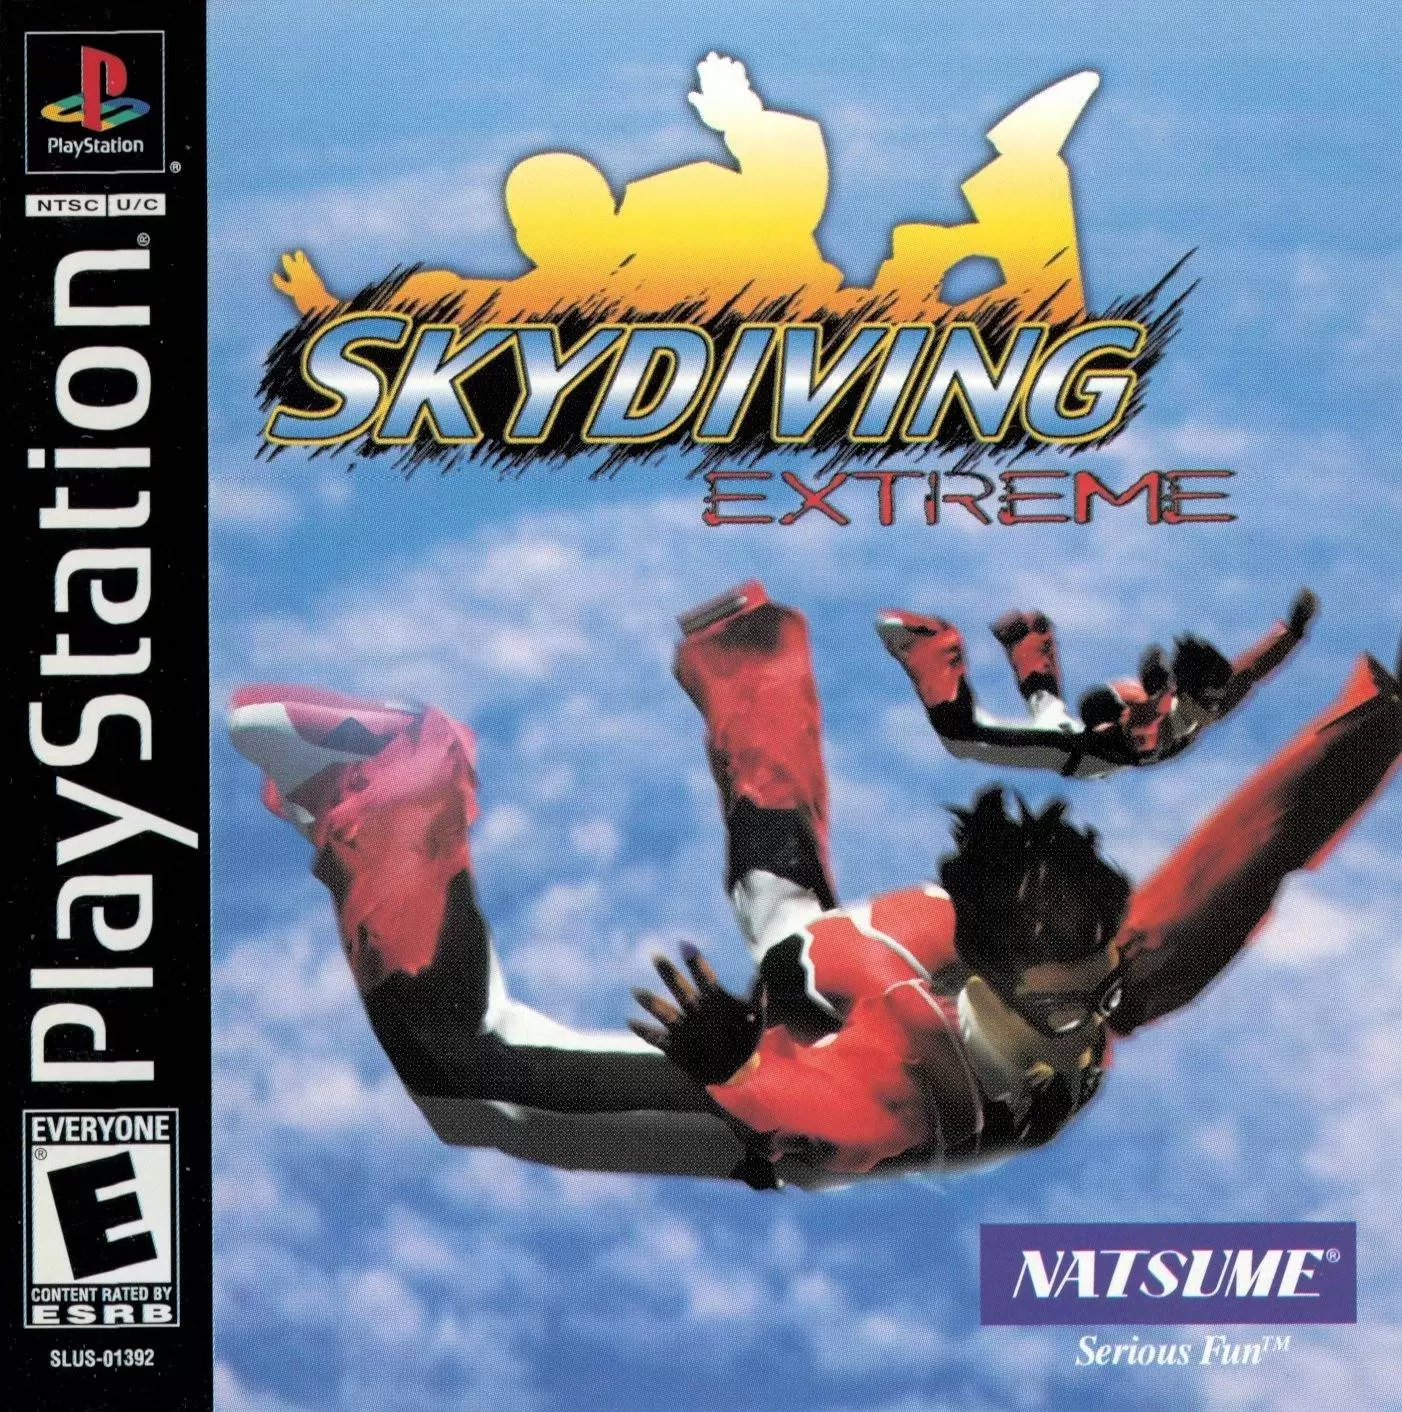 Playstation games - Skydiving Extreme